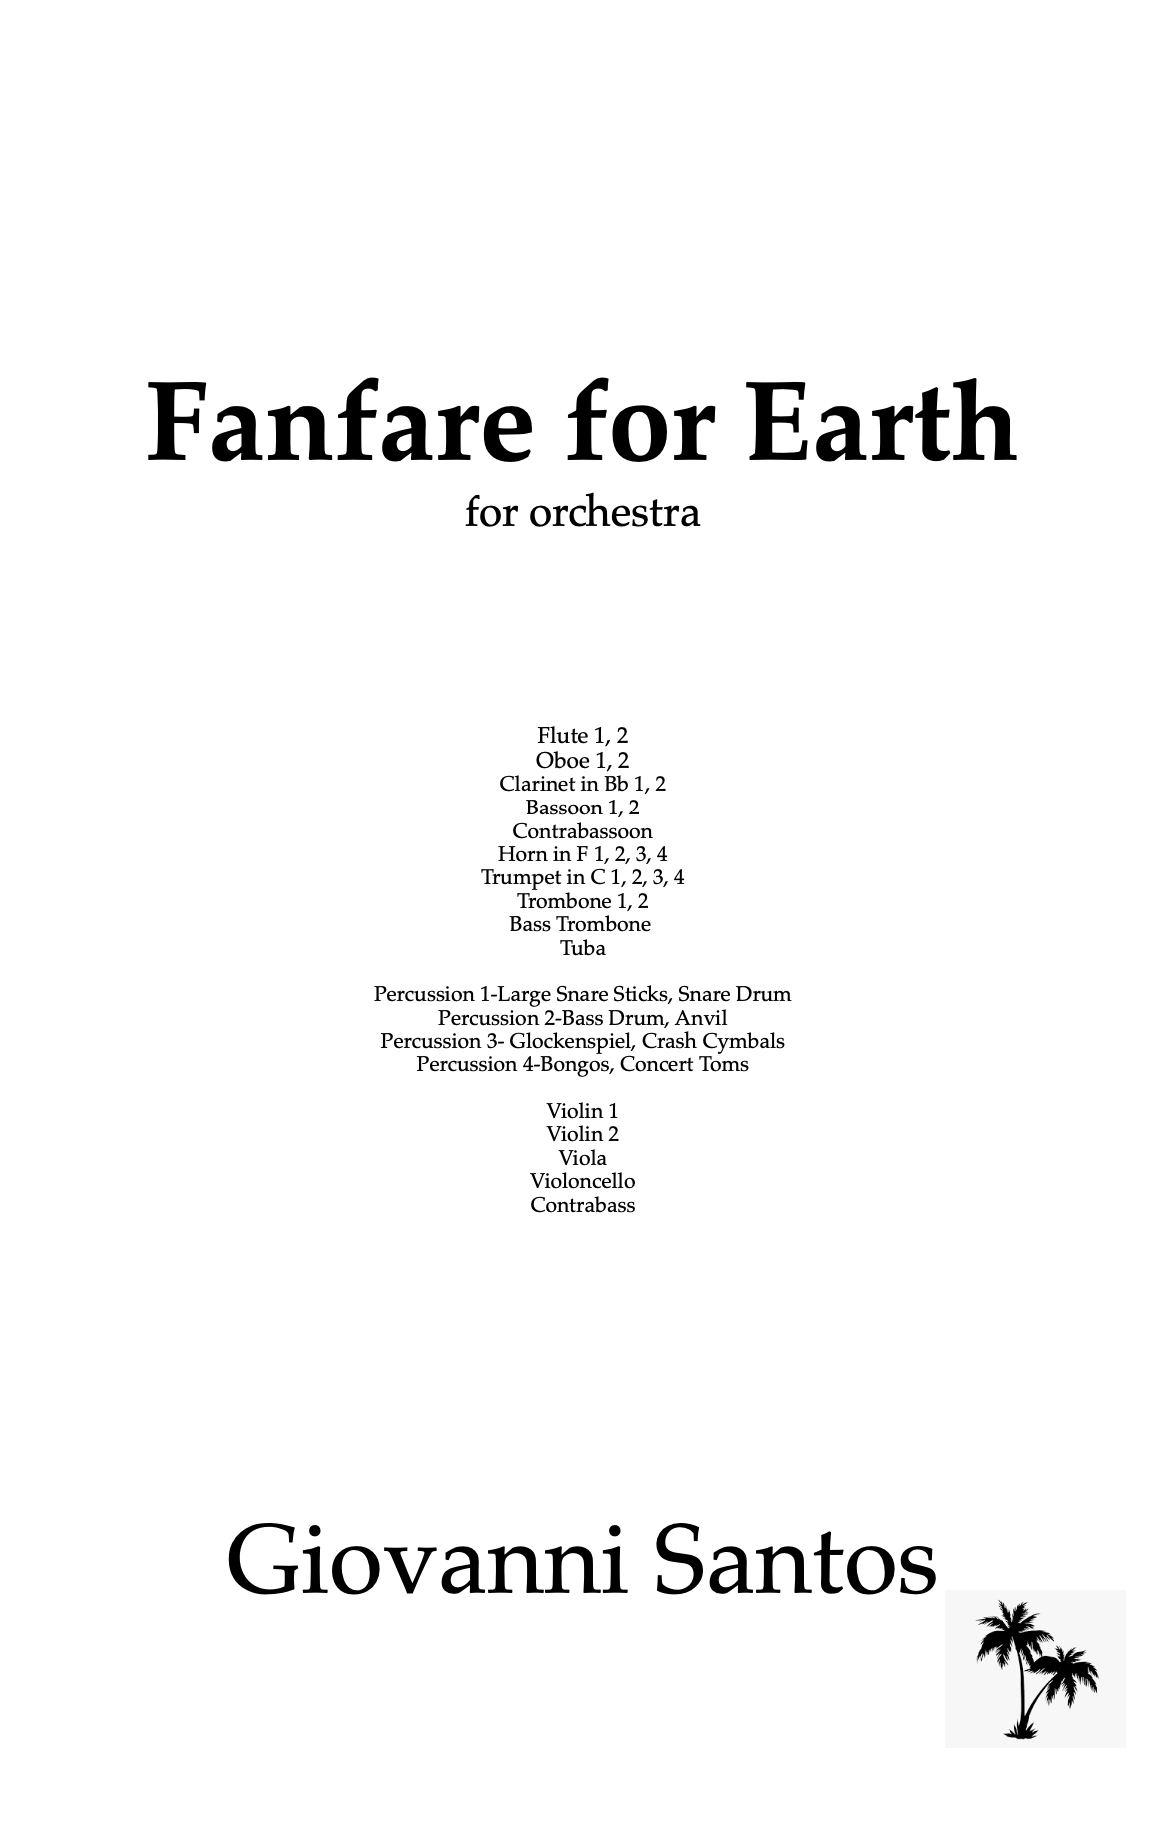 Fanfare For Earth (Score Only) by Giovanni Santos